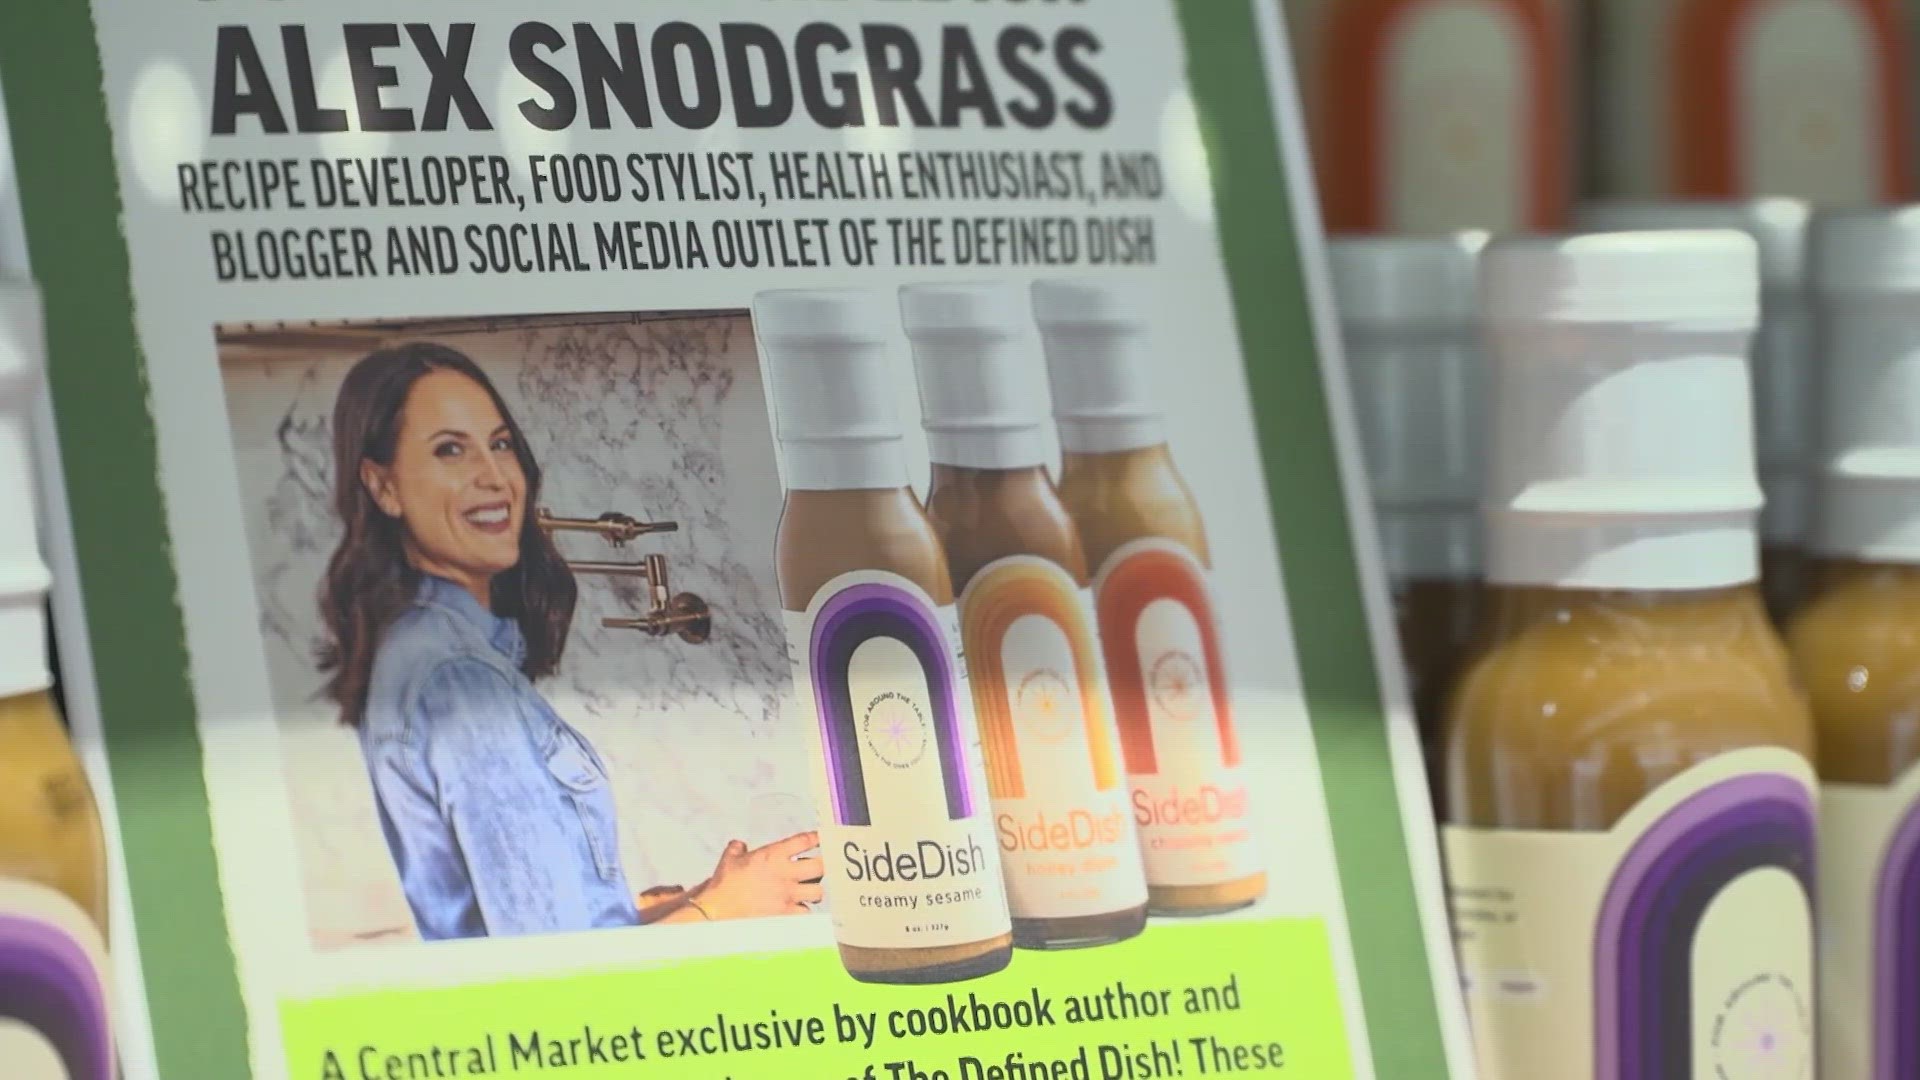 Alex Snodgrass grew her love for cooking into two New York best-selling cookbooks, a line of sauces, and a massive social media following.